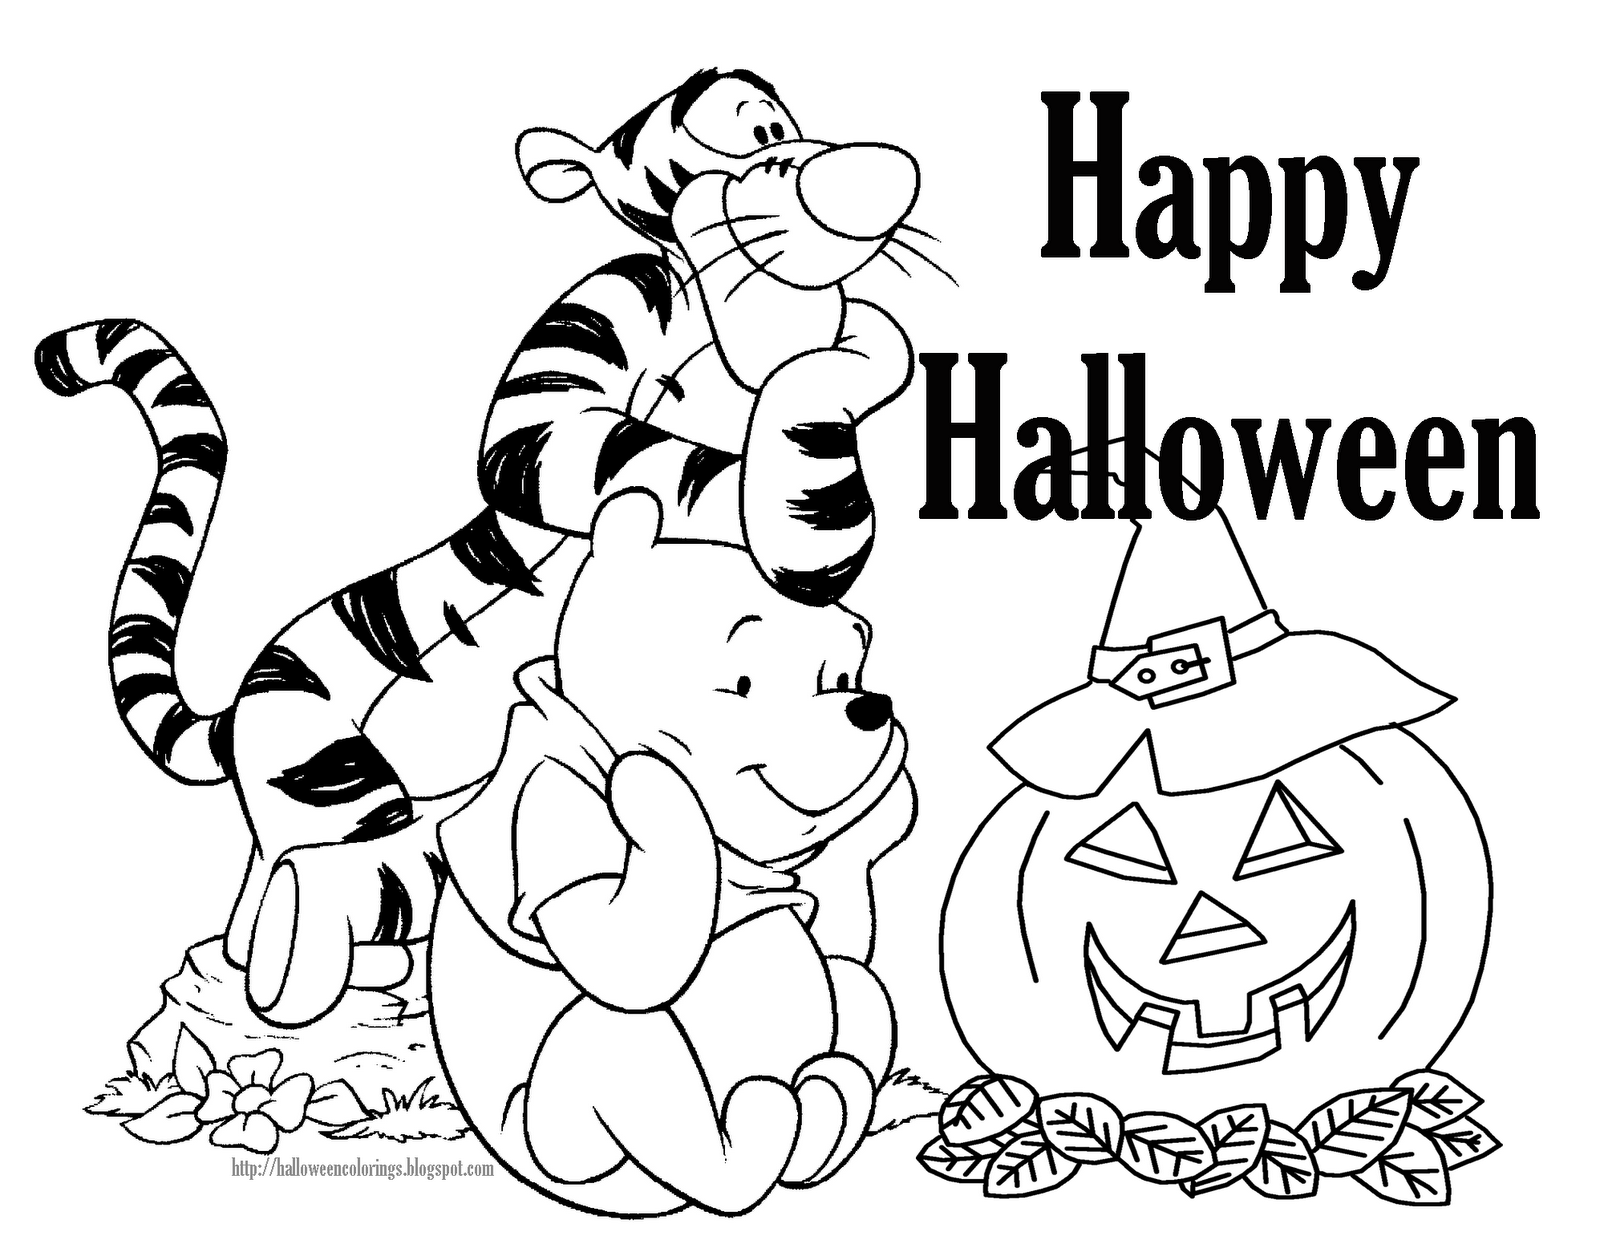 Halloween Coloring Pages For Kids (19 Pictures) - Colorine.net | 12941